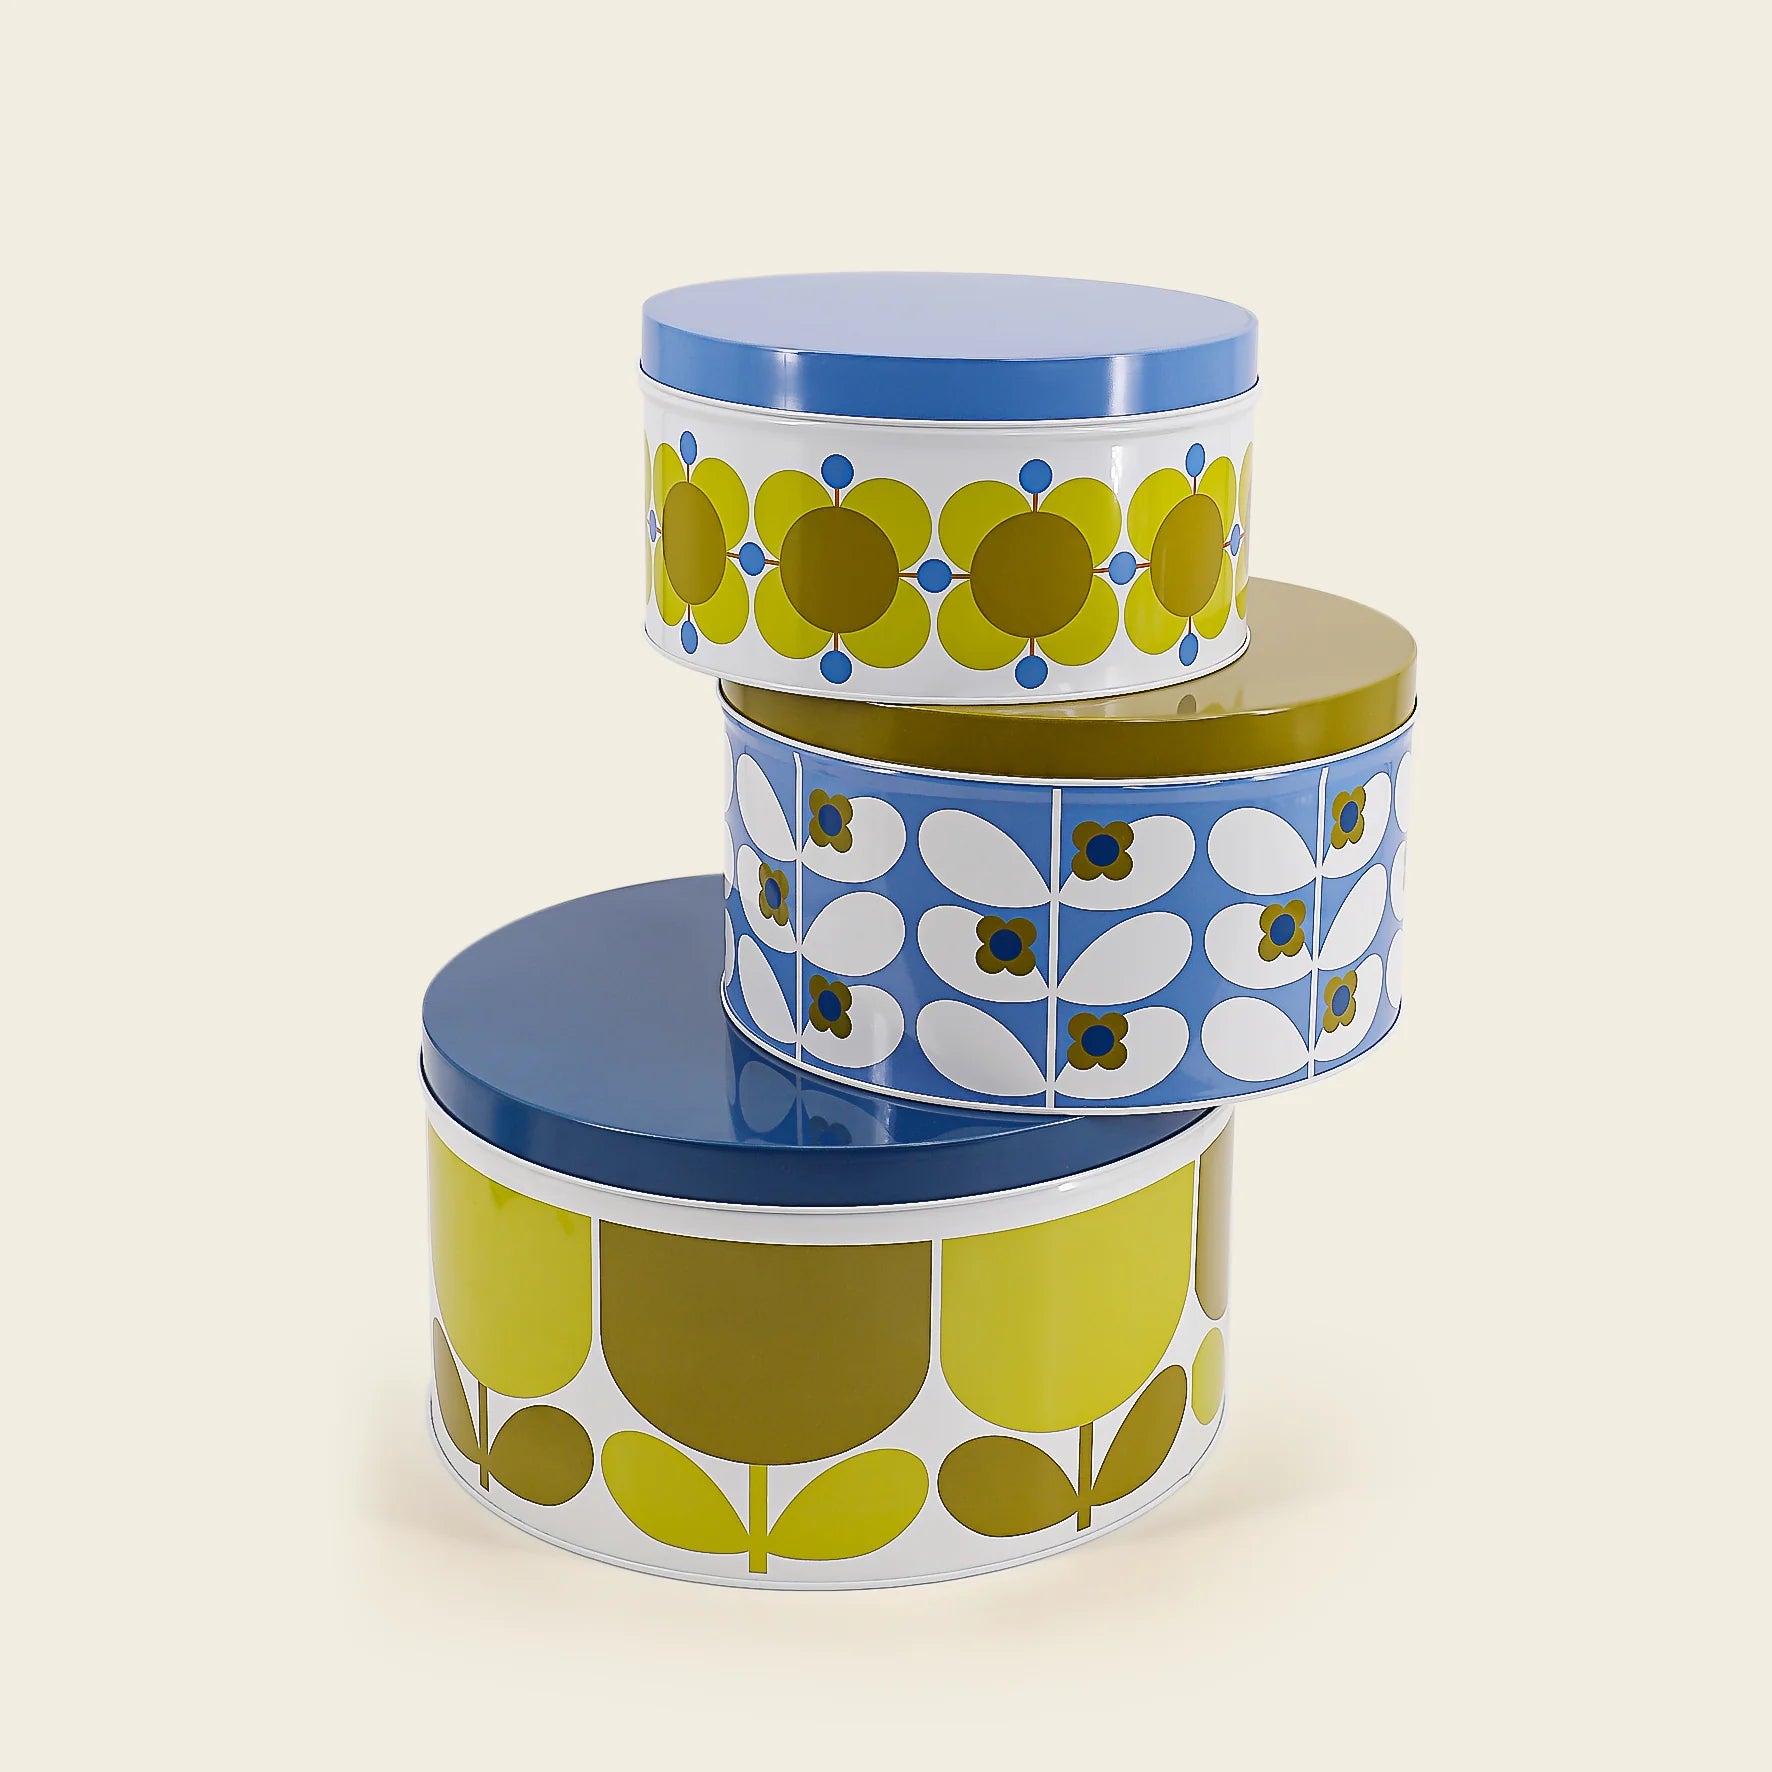 Fab Gifts | Orla Kiely Sunflower Sky Nesting Cake Tins Set Of 3 by Weirs of Baggot Street